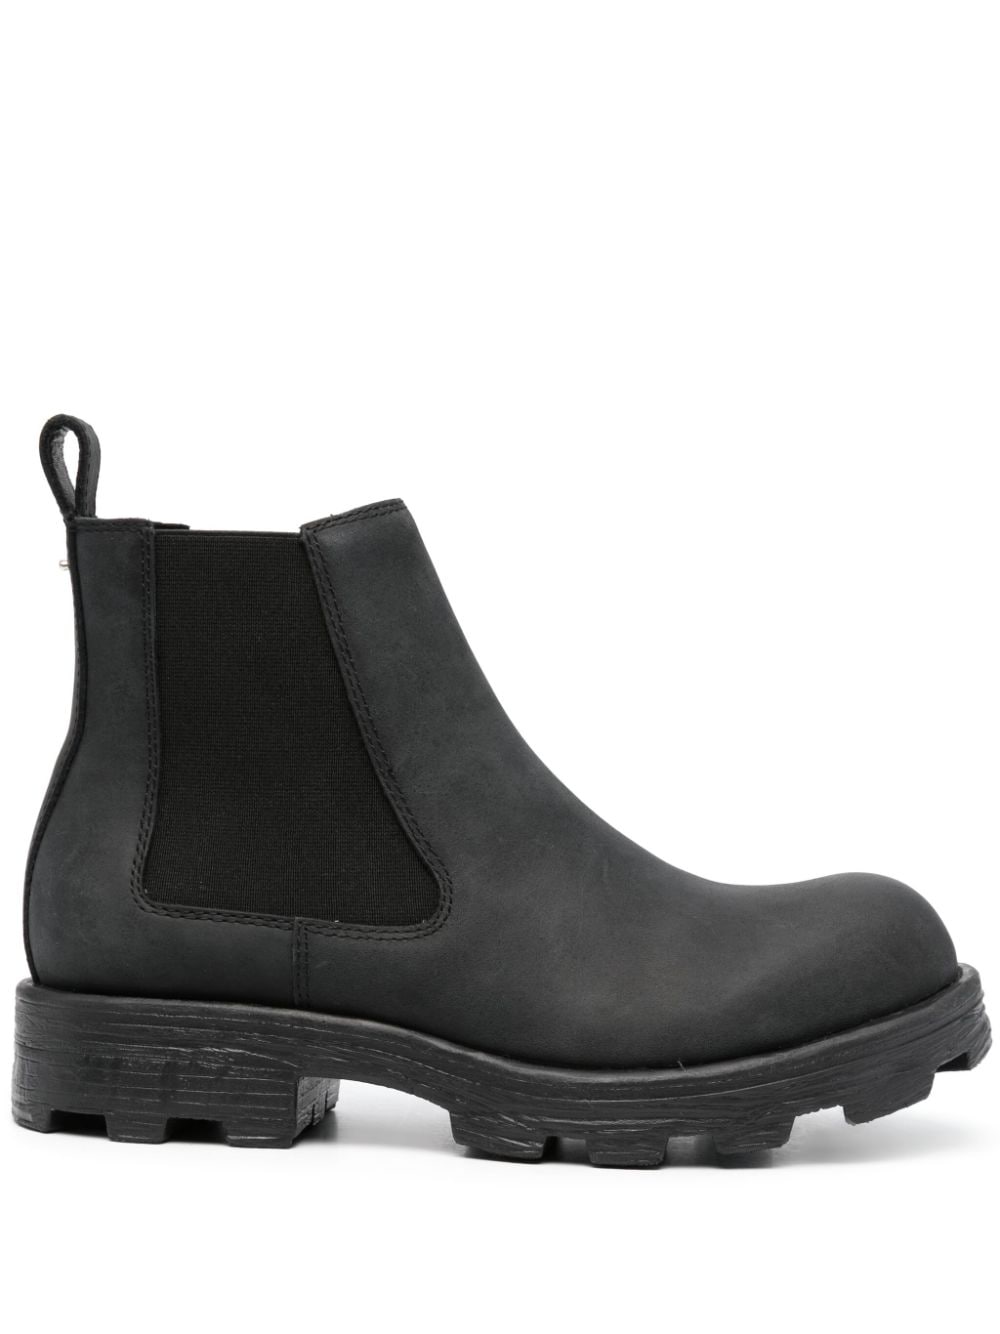 D-Hammer Lch ankle boots